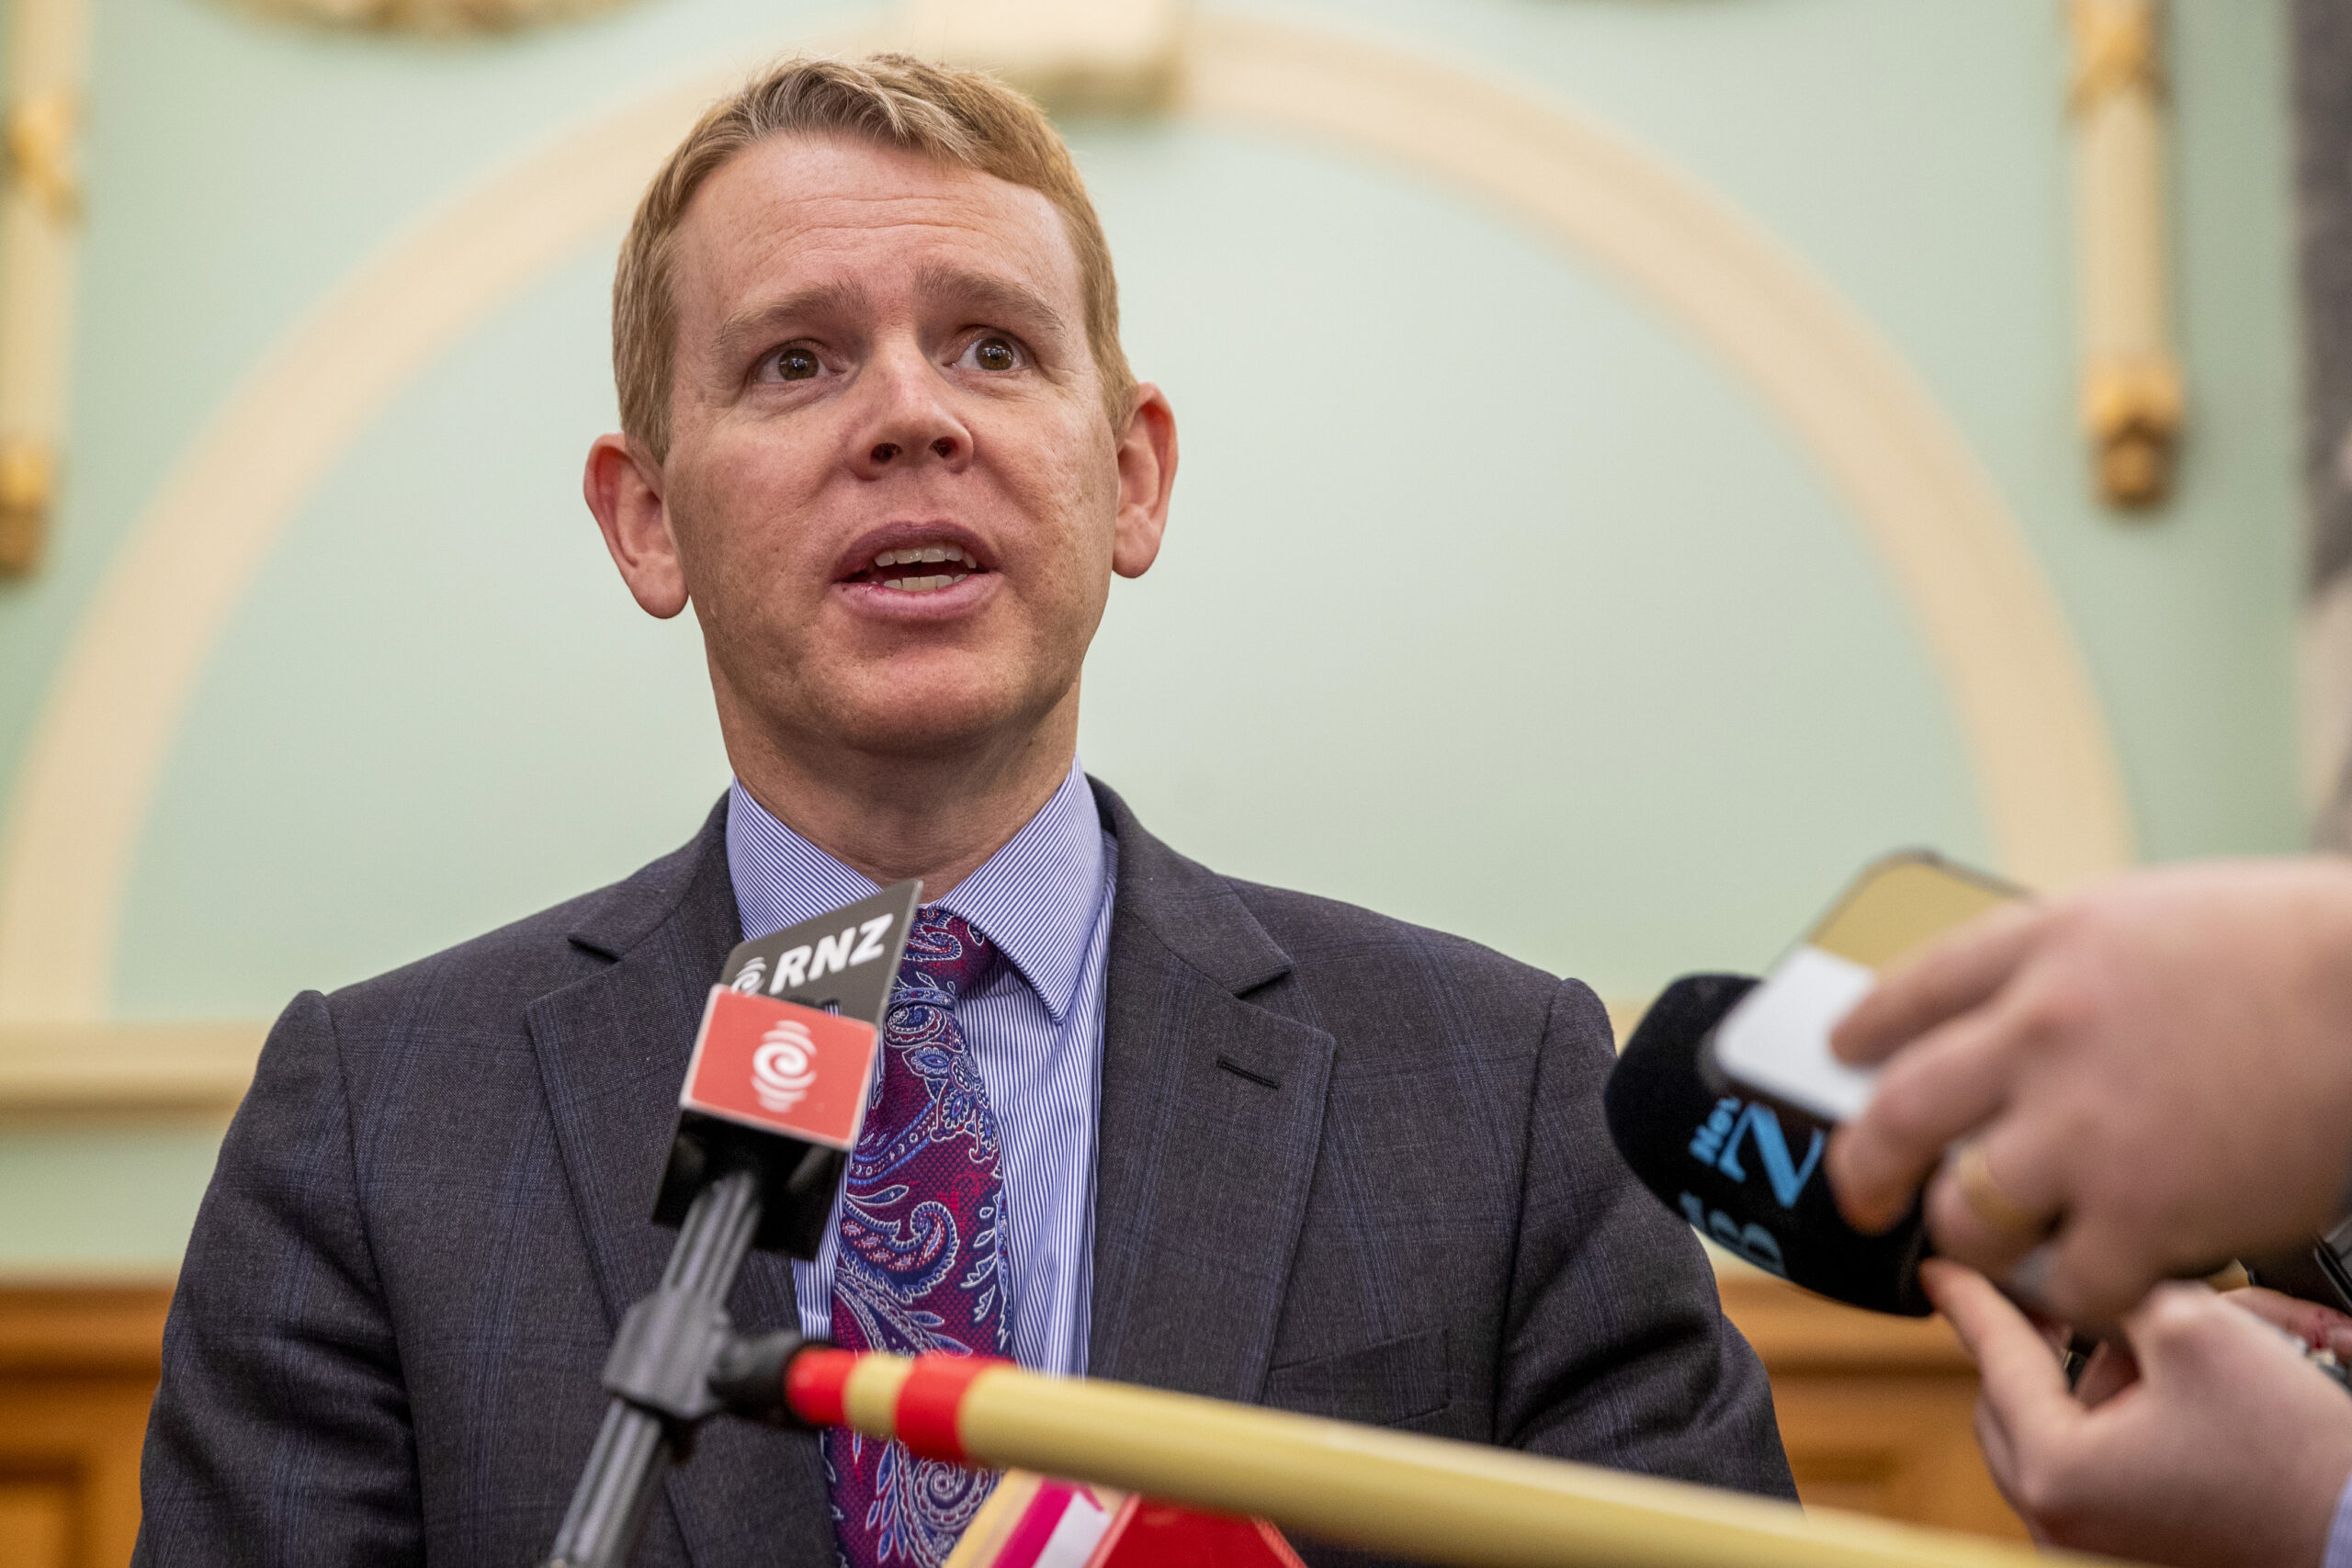 New Zealand Police Minister Chris Hipkins during his press conference at Parliament, Wellington, New Zealand, Thursday, June 30, 2022. New Zealand's government has declared that American far-right groups the Proud Boys and The Base are terrorist organizations. (Mark Mitchell/New Zealand Herald via AP)